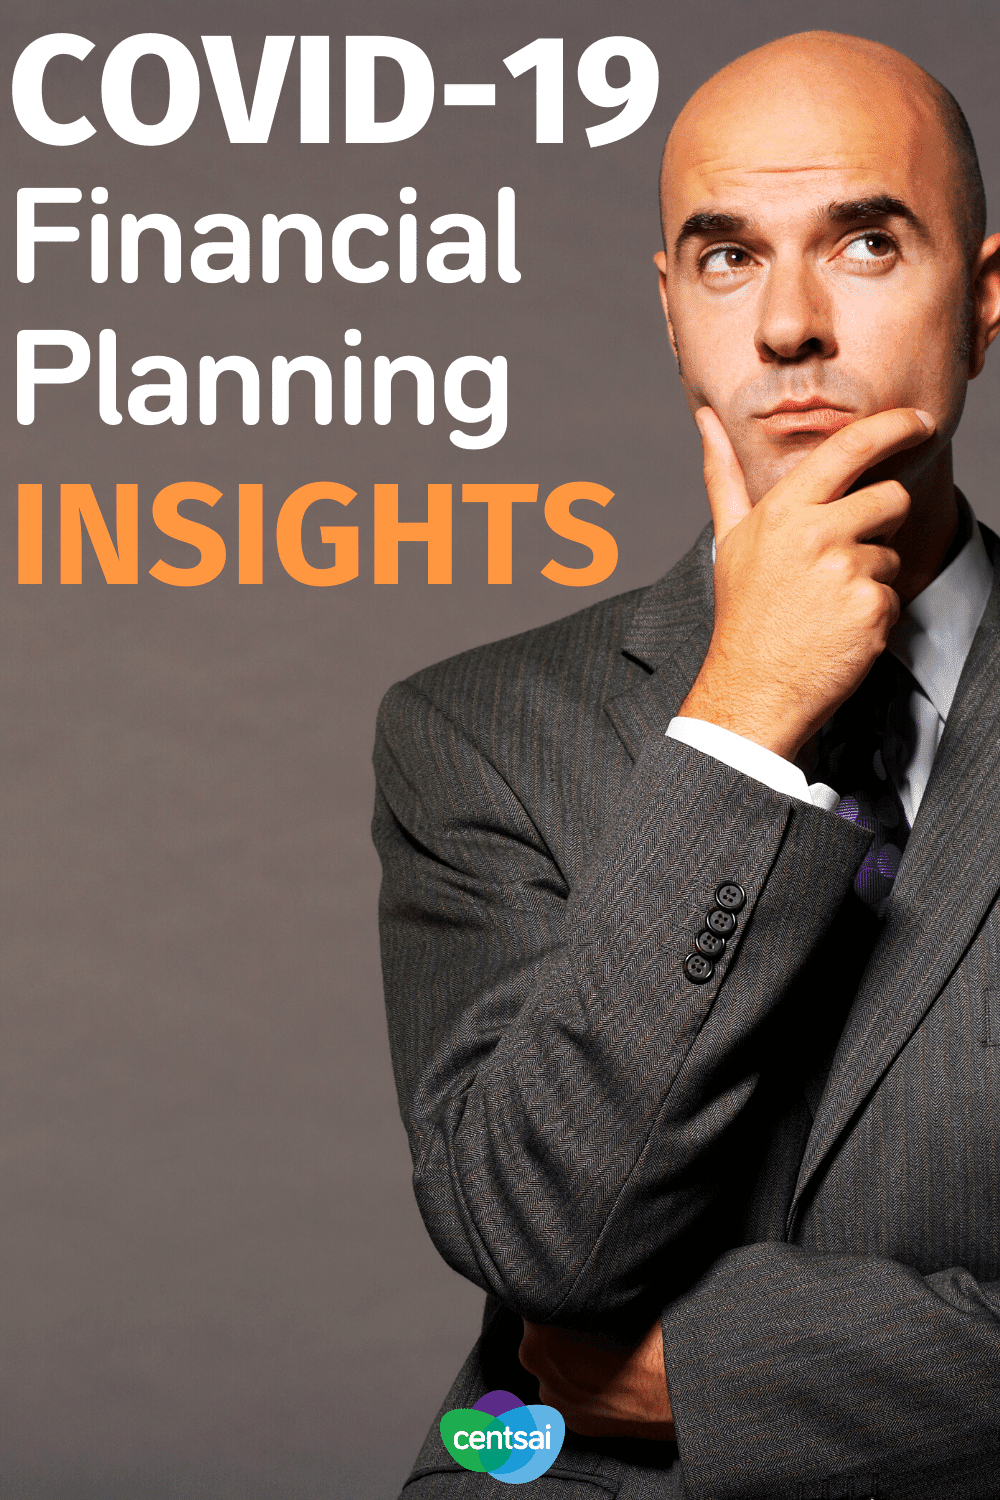 COVID-19 Financial Planning Insights